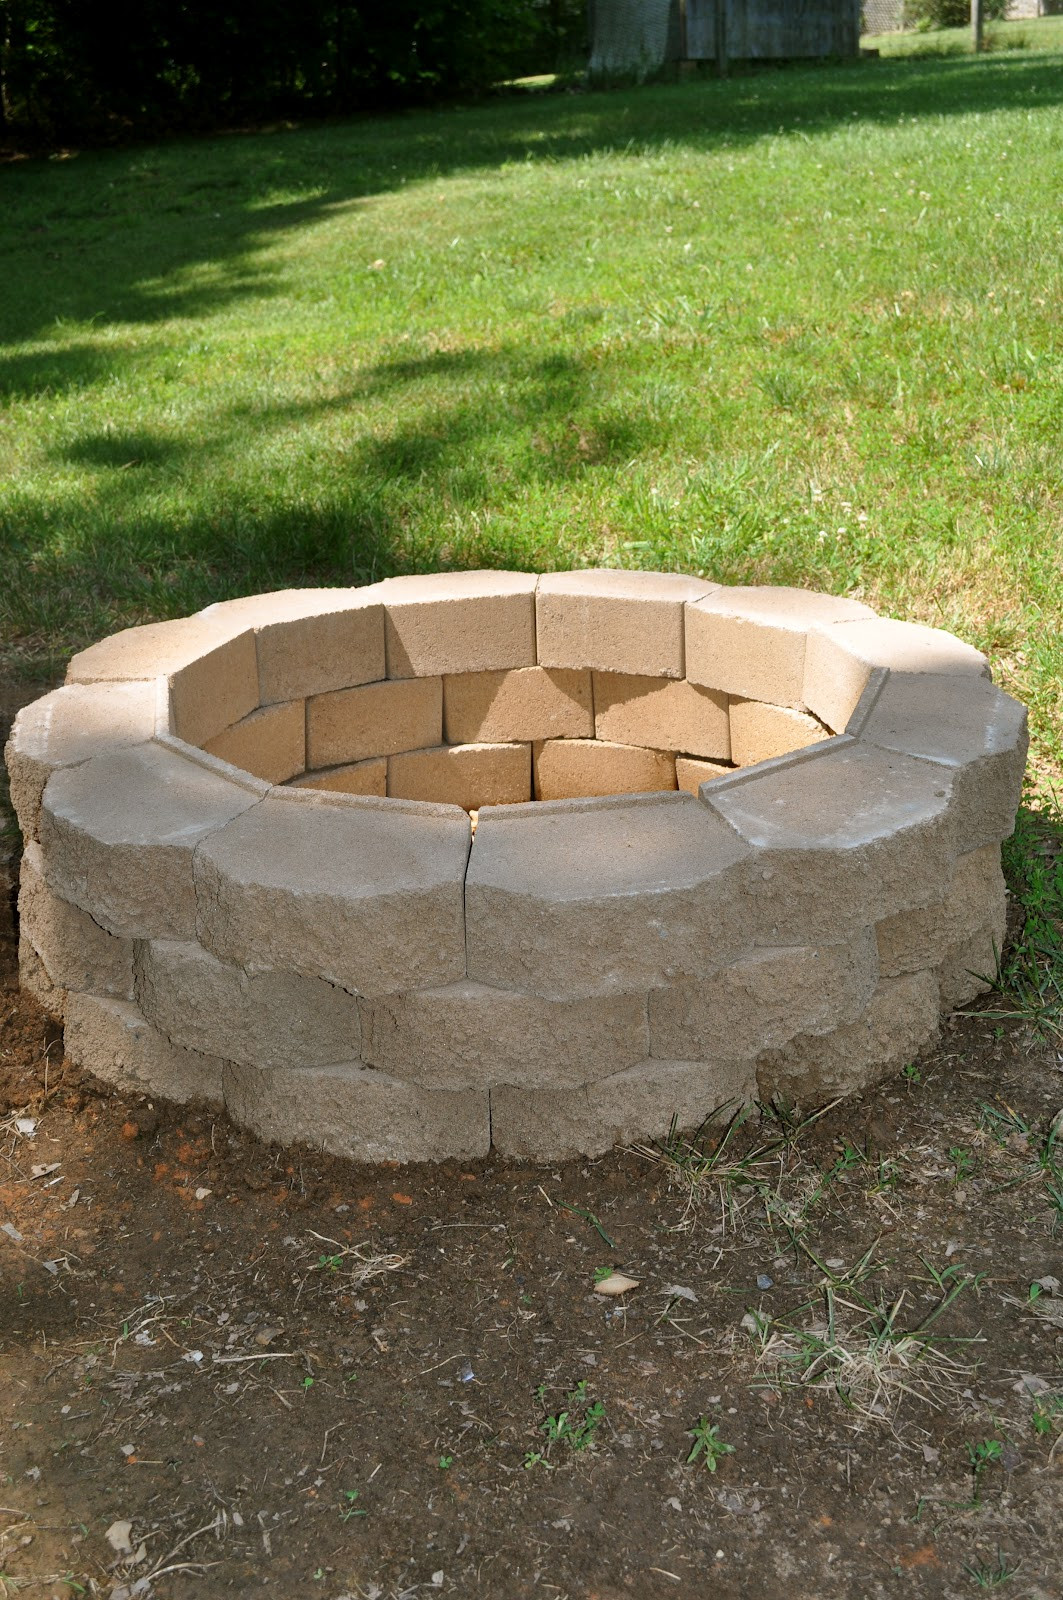 DIY Fire Pits Outdoor
 Diy brick fire pit Make Your Own Fire Pit at Home